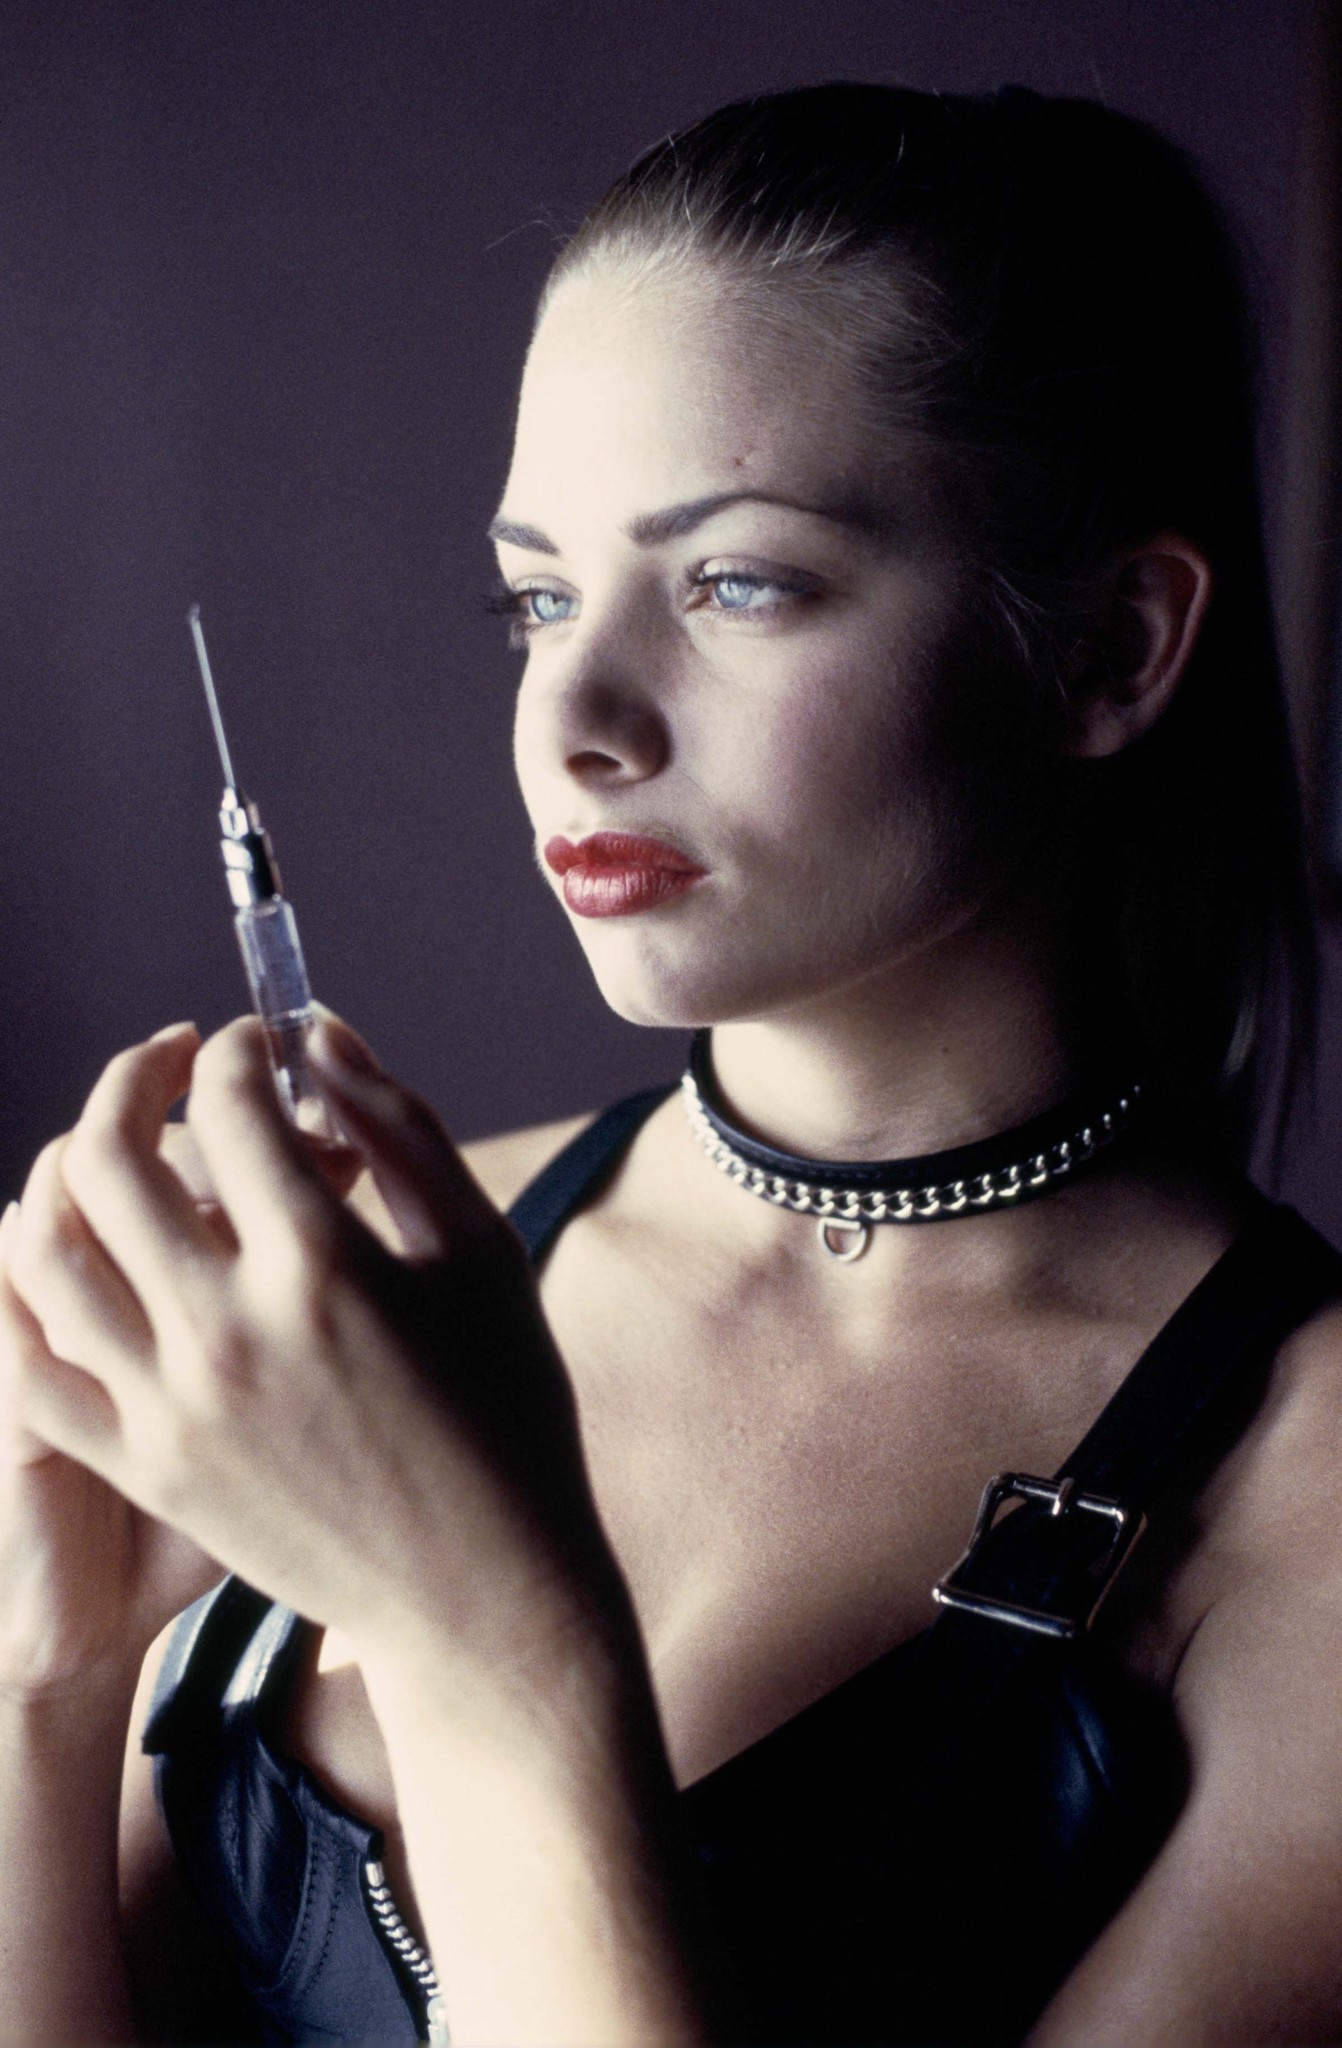 Still of Jaime Pressly in Poison Ivy: The New Seduction (1997)